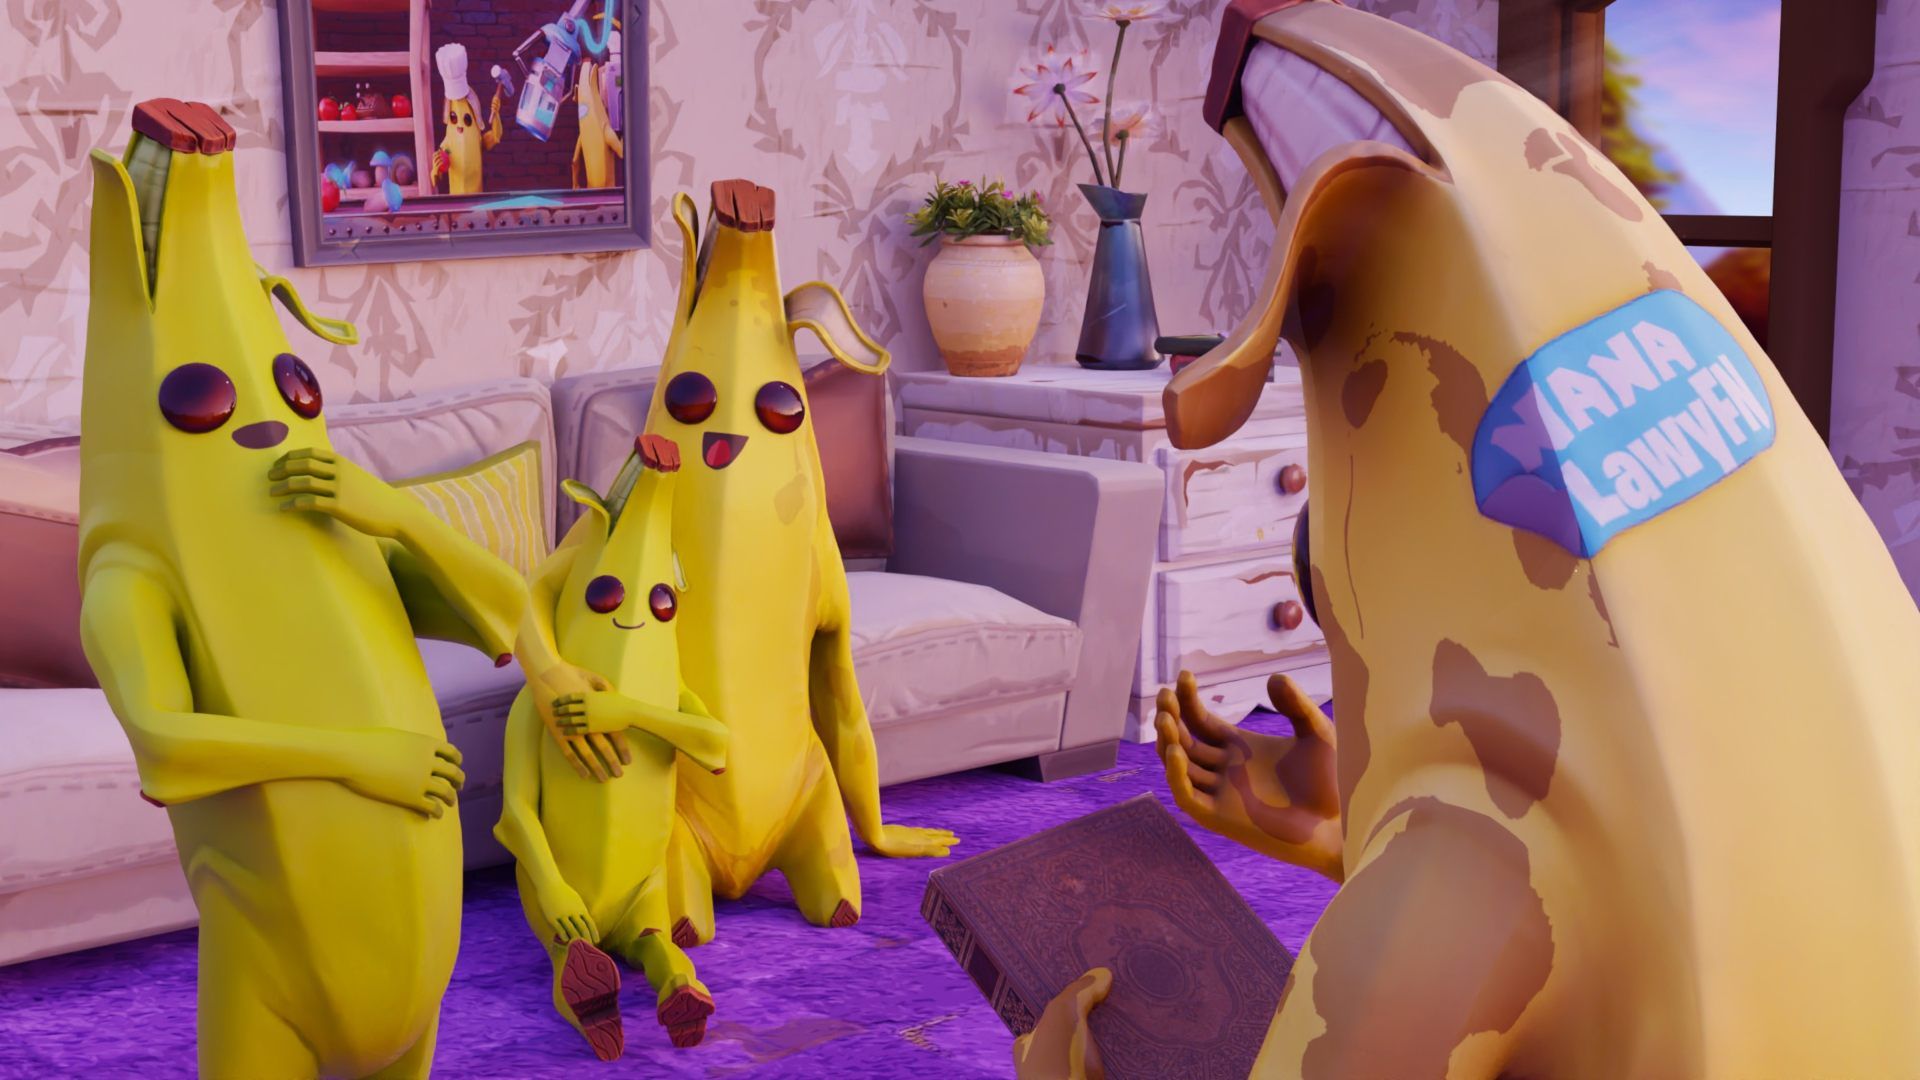 Free download New Cool Peely Banana Skin Fortnite Come And Get It